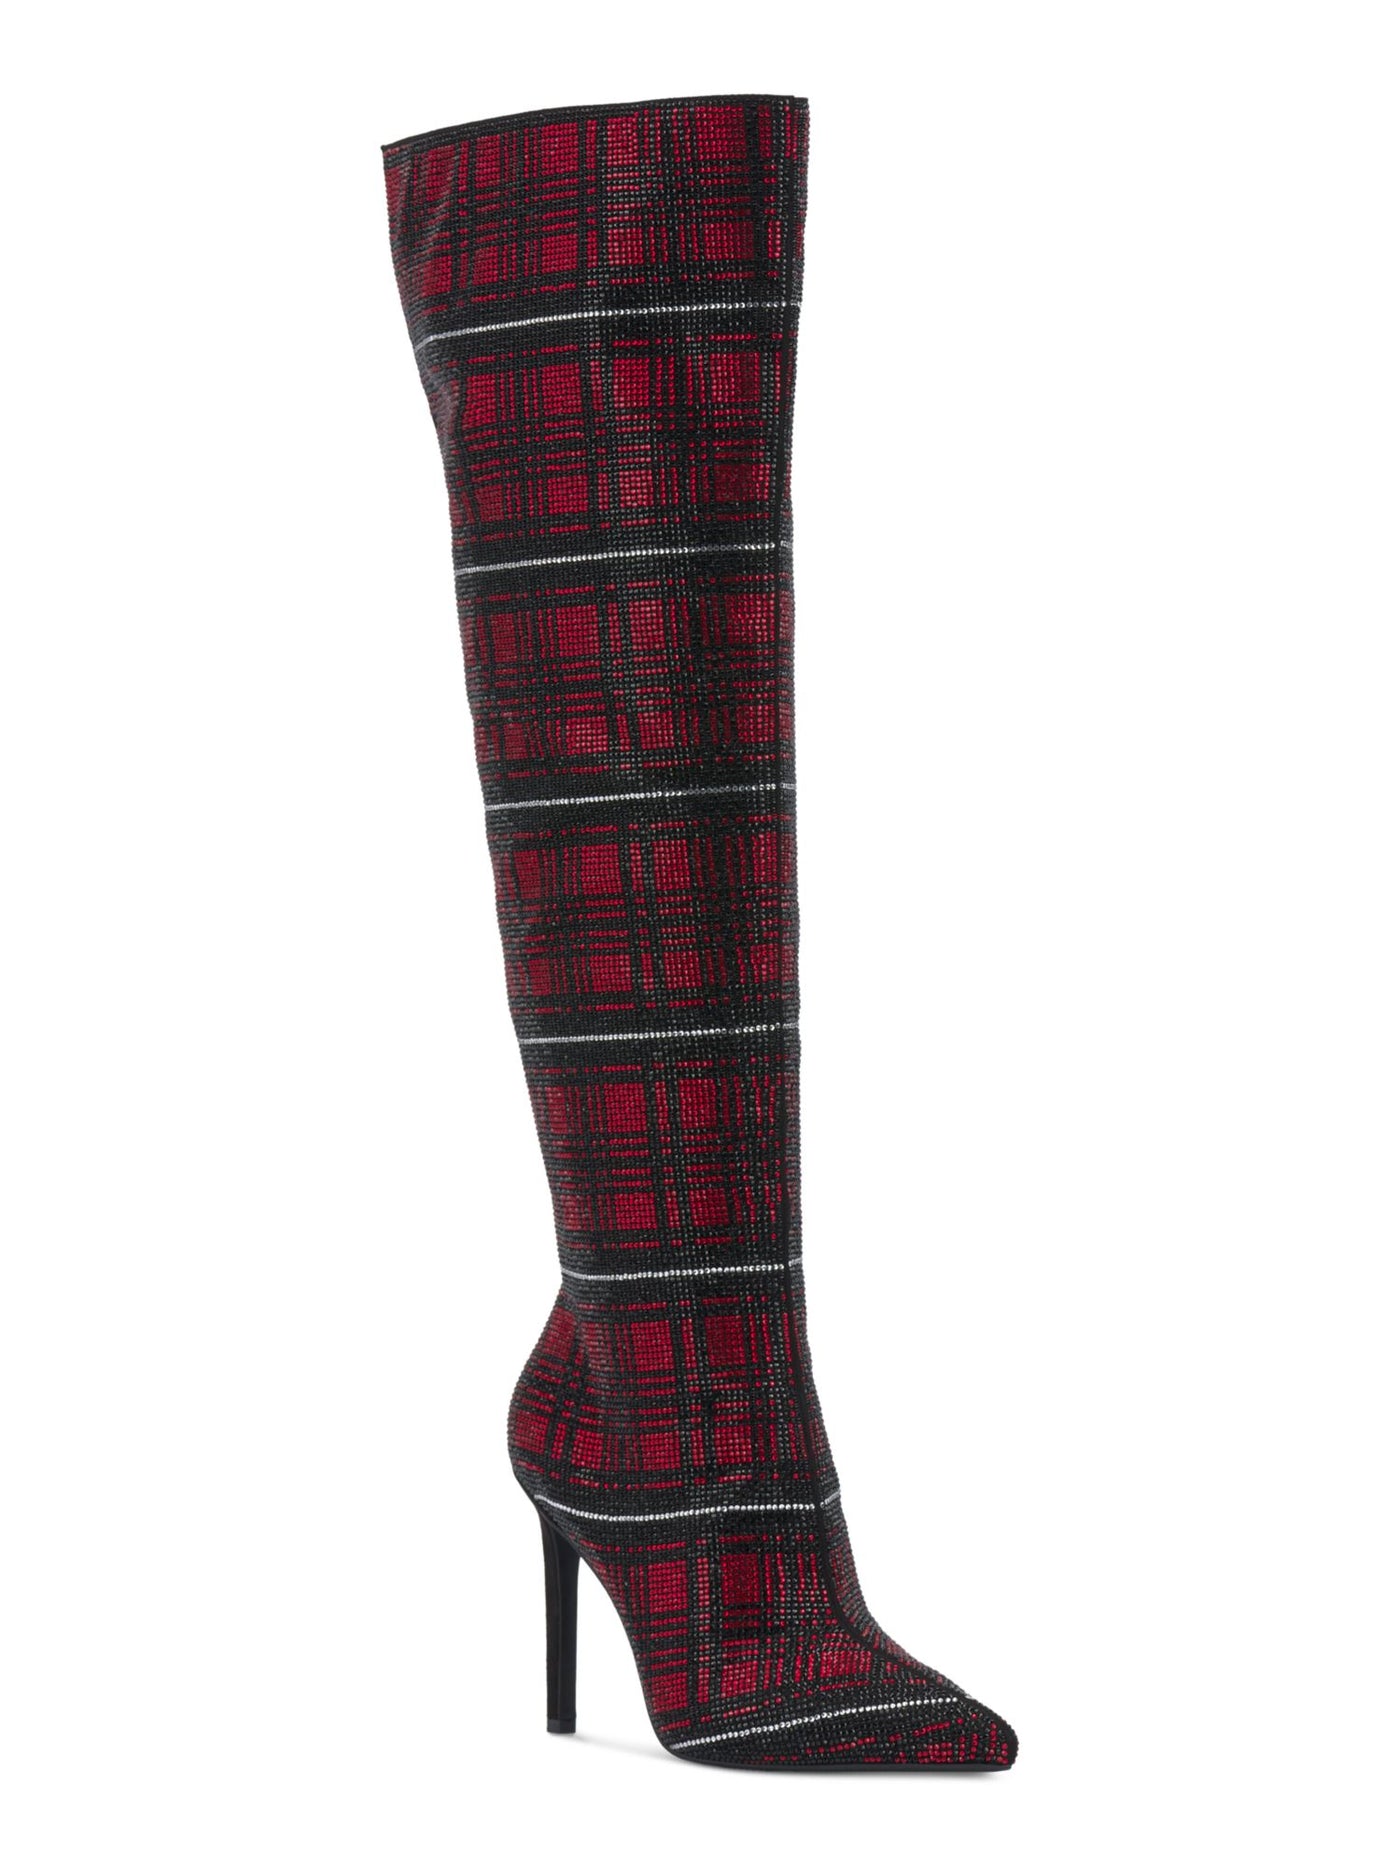 INC Womens Red Plaid Vented Back Padded Rhinestone Goring Saveria Pointed Toe Stiletto Zip-Up Dress Boots 6.5 M